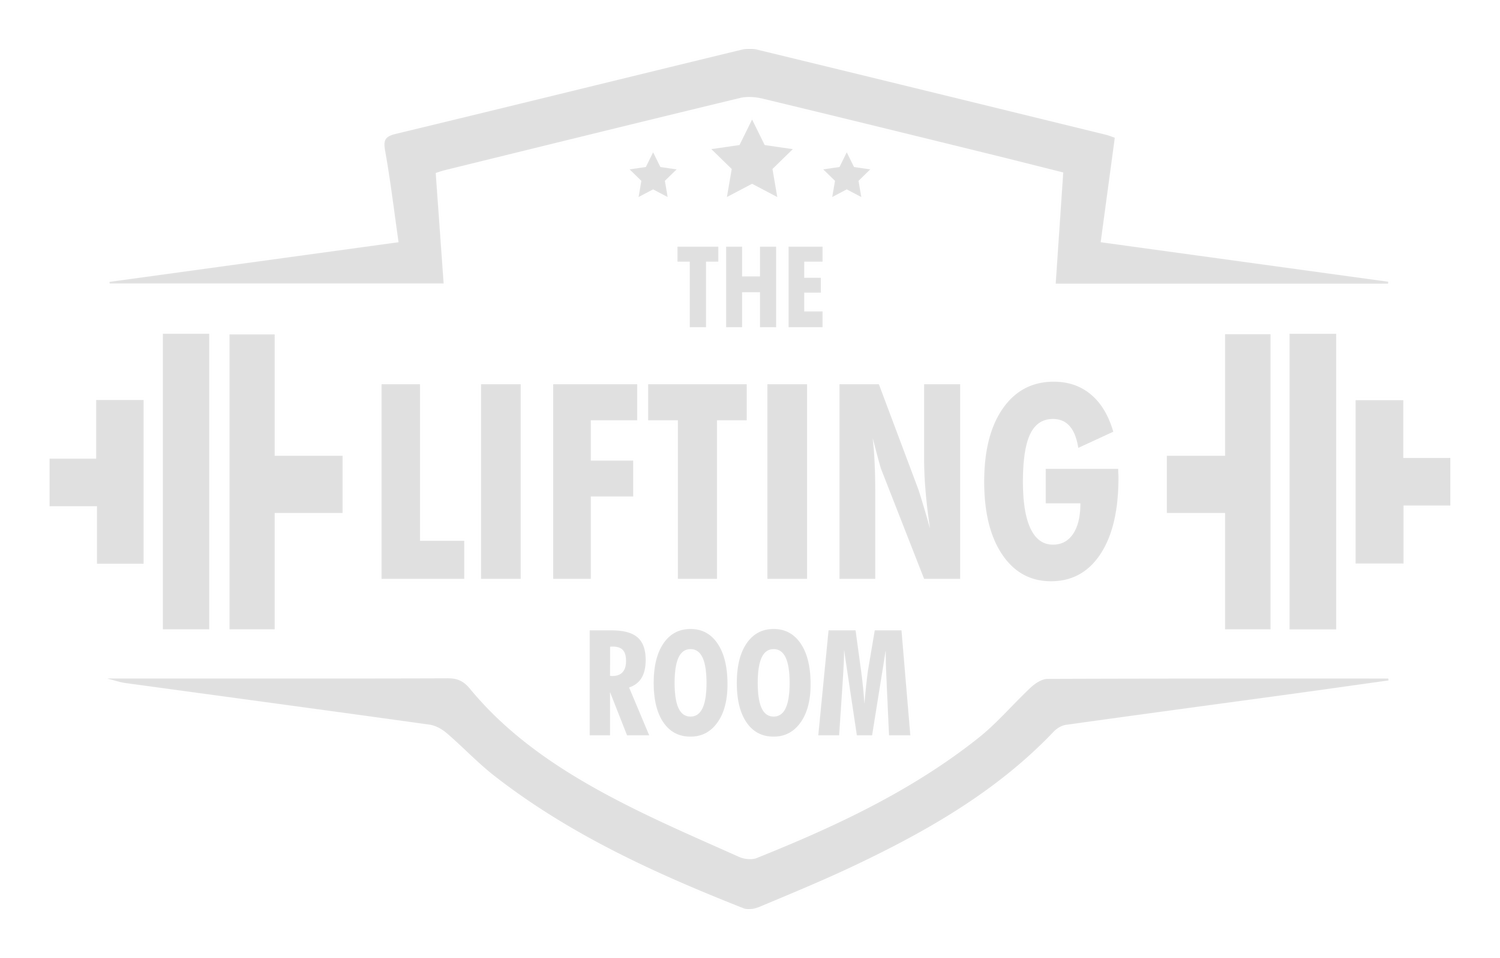 The Lifting Room